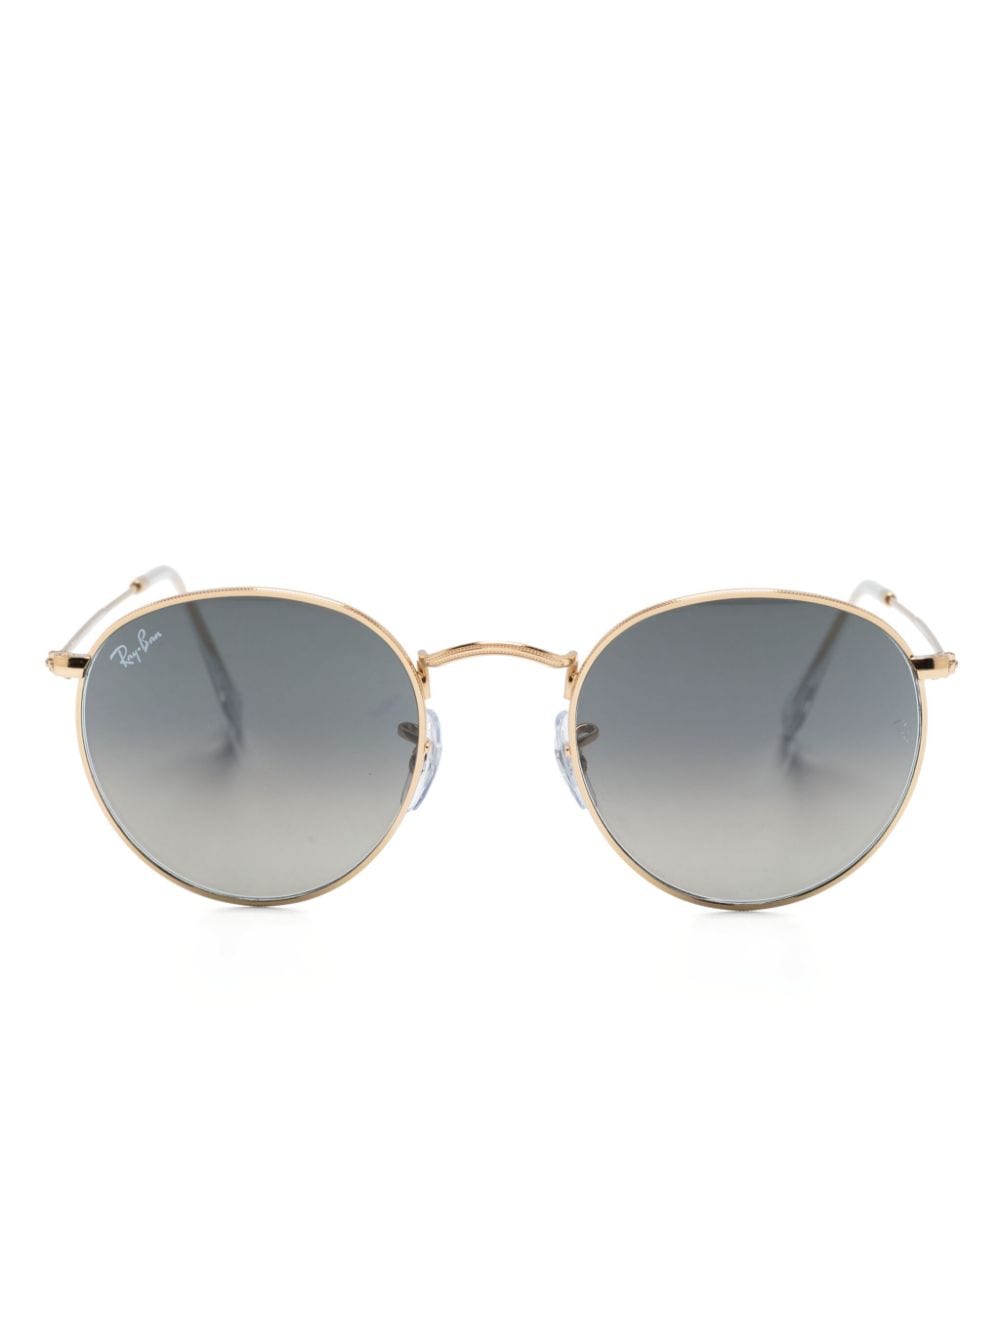 Ray Ban Metallic Round-frame Sunglasses In Gold